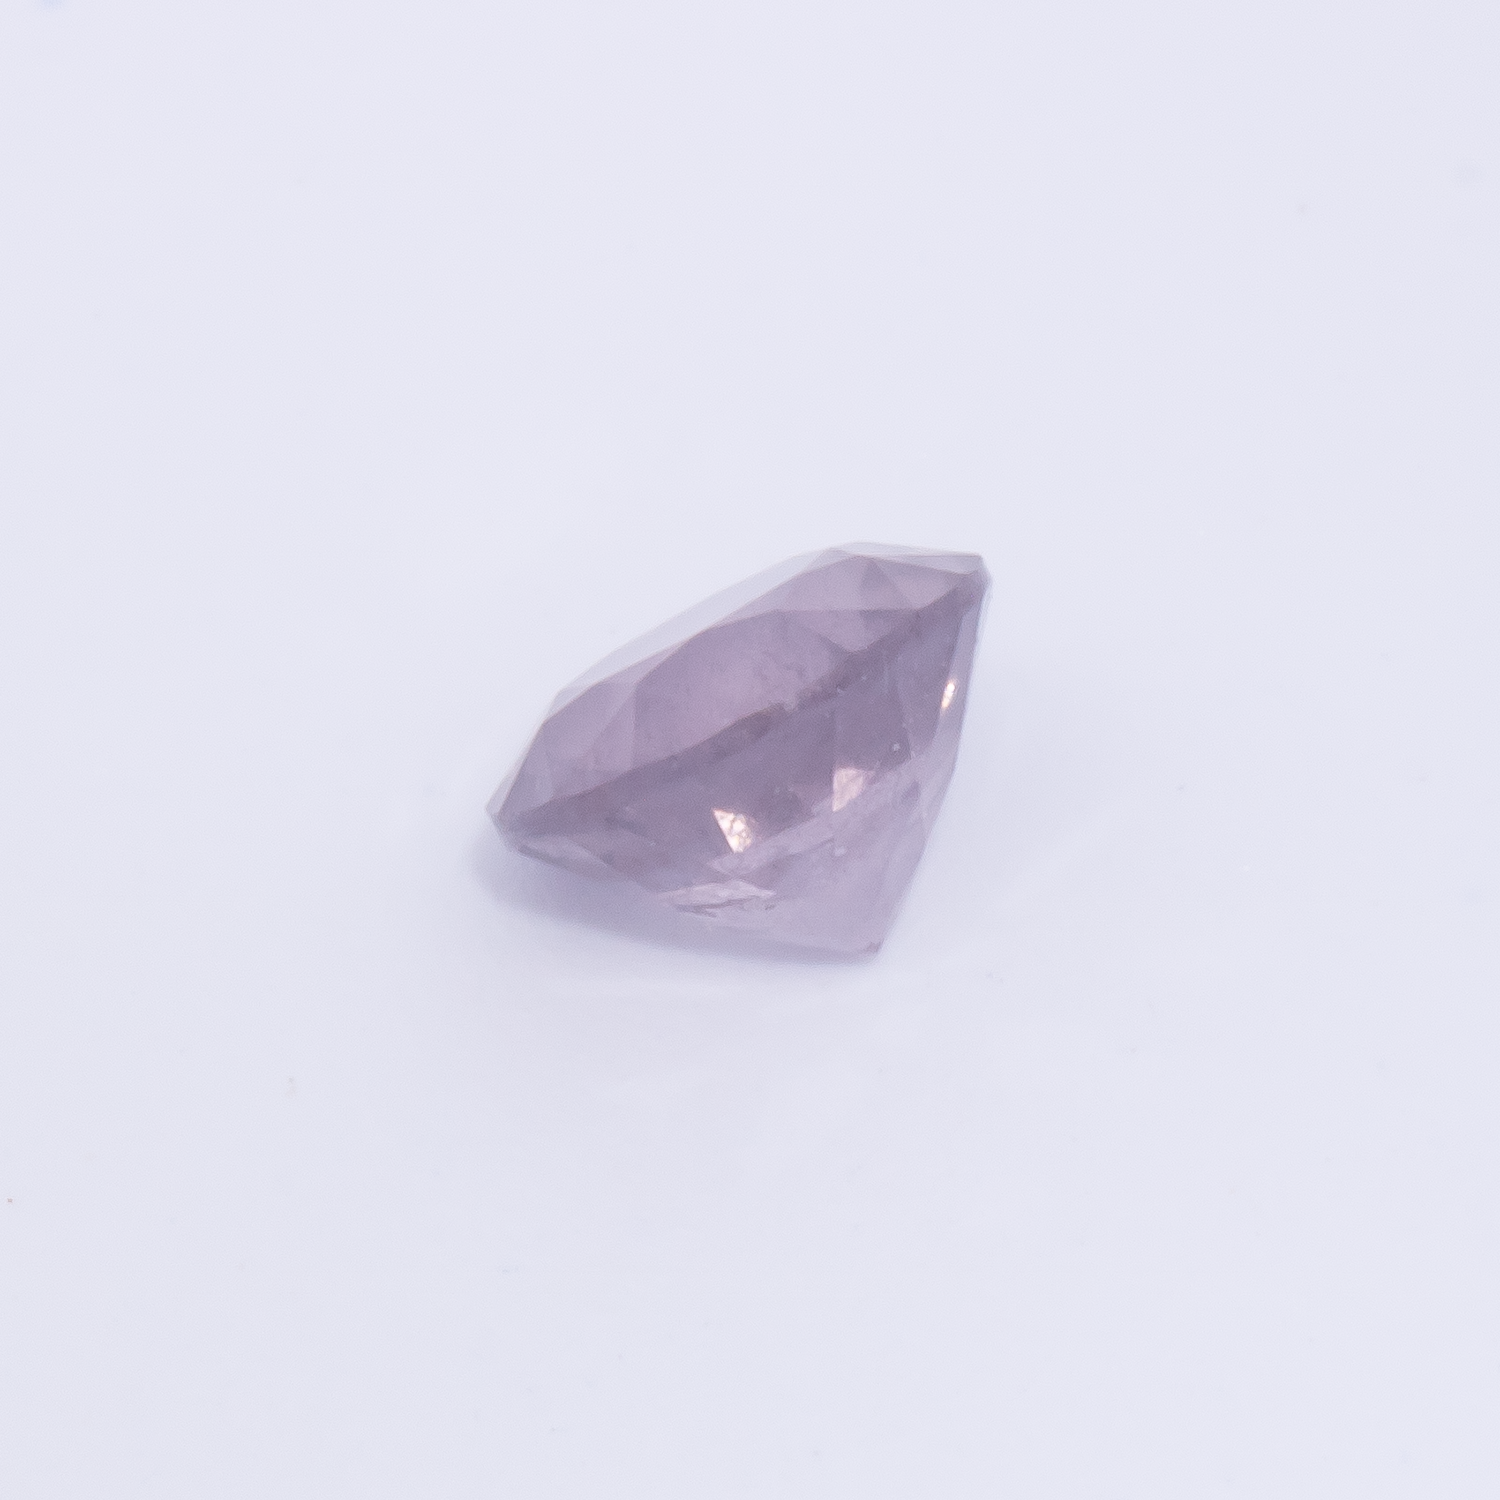 Spinell - lila, rund, 4.6x4.6 mm, 0.45 cts, Nr. SP90067